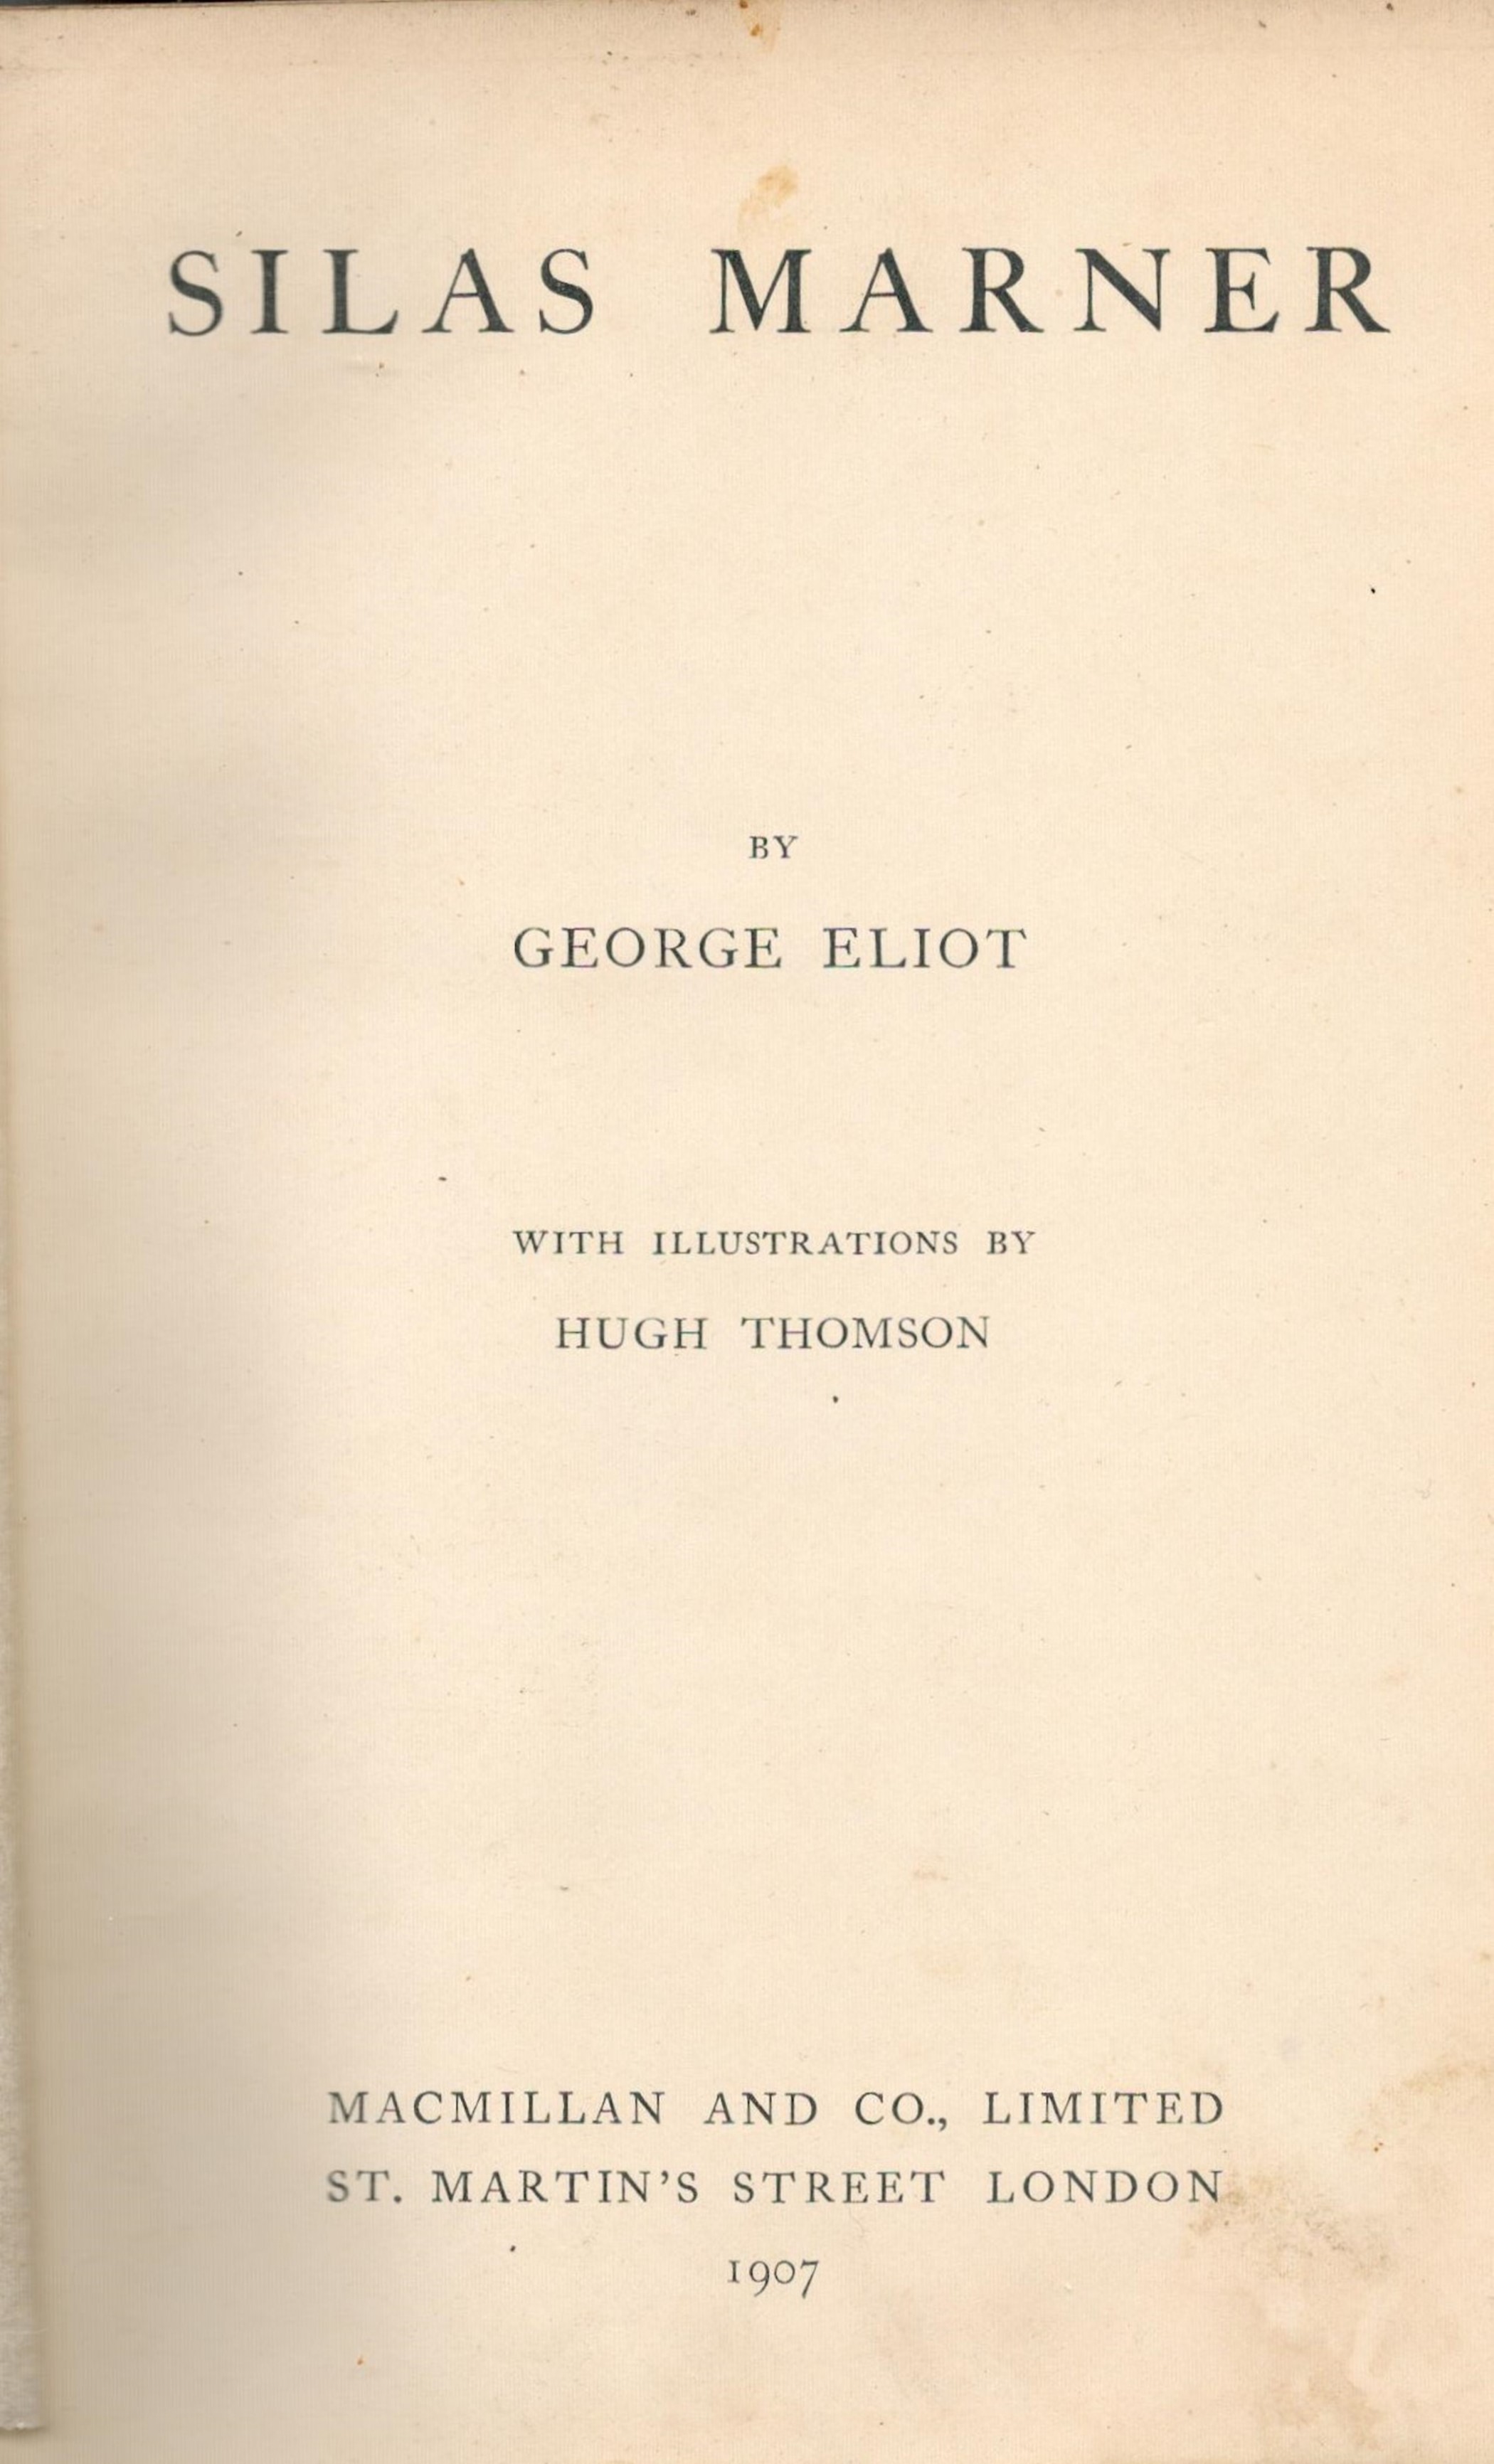 Silas Marner by George Eliot Hardback Book 1907 edition unknown published by Macmillan and Co Ltd - Image 2 of 3